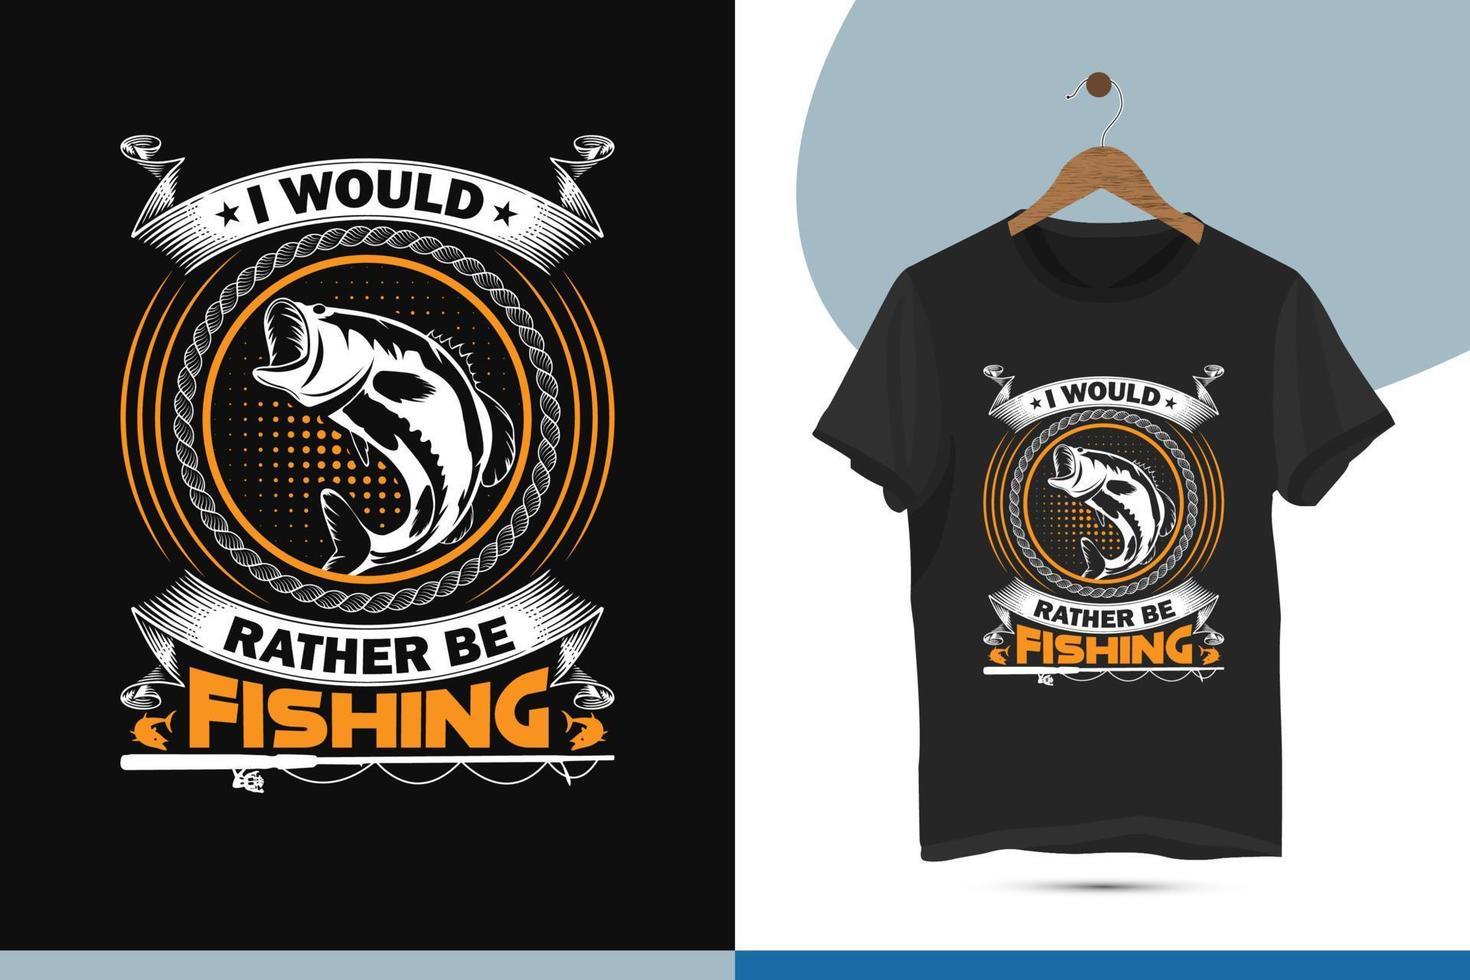 https://static.vecteezy.com/system/resources/previews/017/775/738/non_2x/i-would-rather-be-fishing-fishing-unique-typography-t-shirt-design-template-fishing-holiday-design-for-a-shirt-mug-greeting-card-and-poster-editable-and-customizable-illustration-vector.jpg